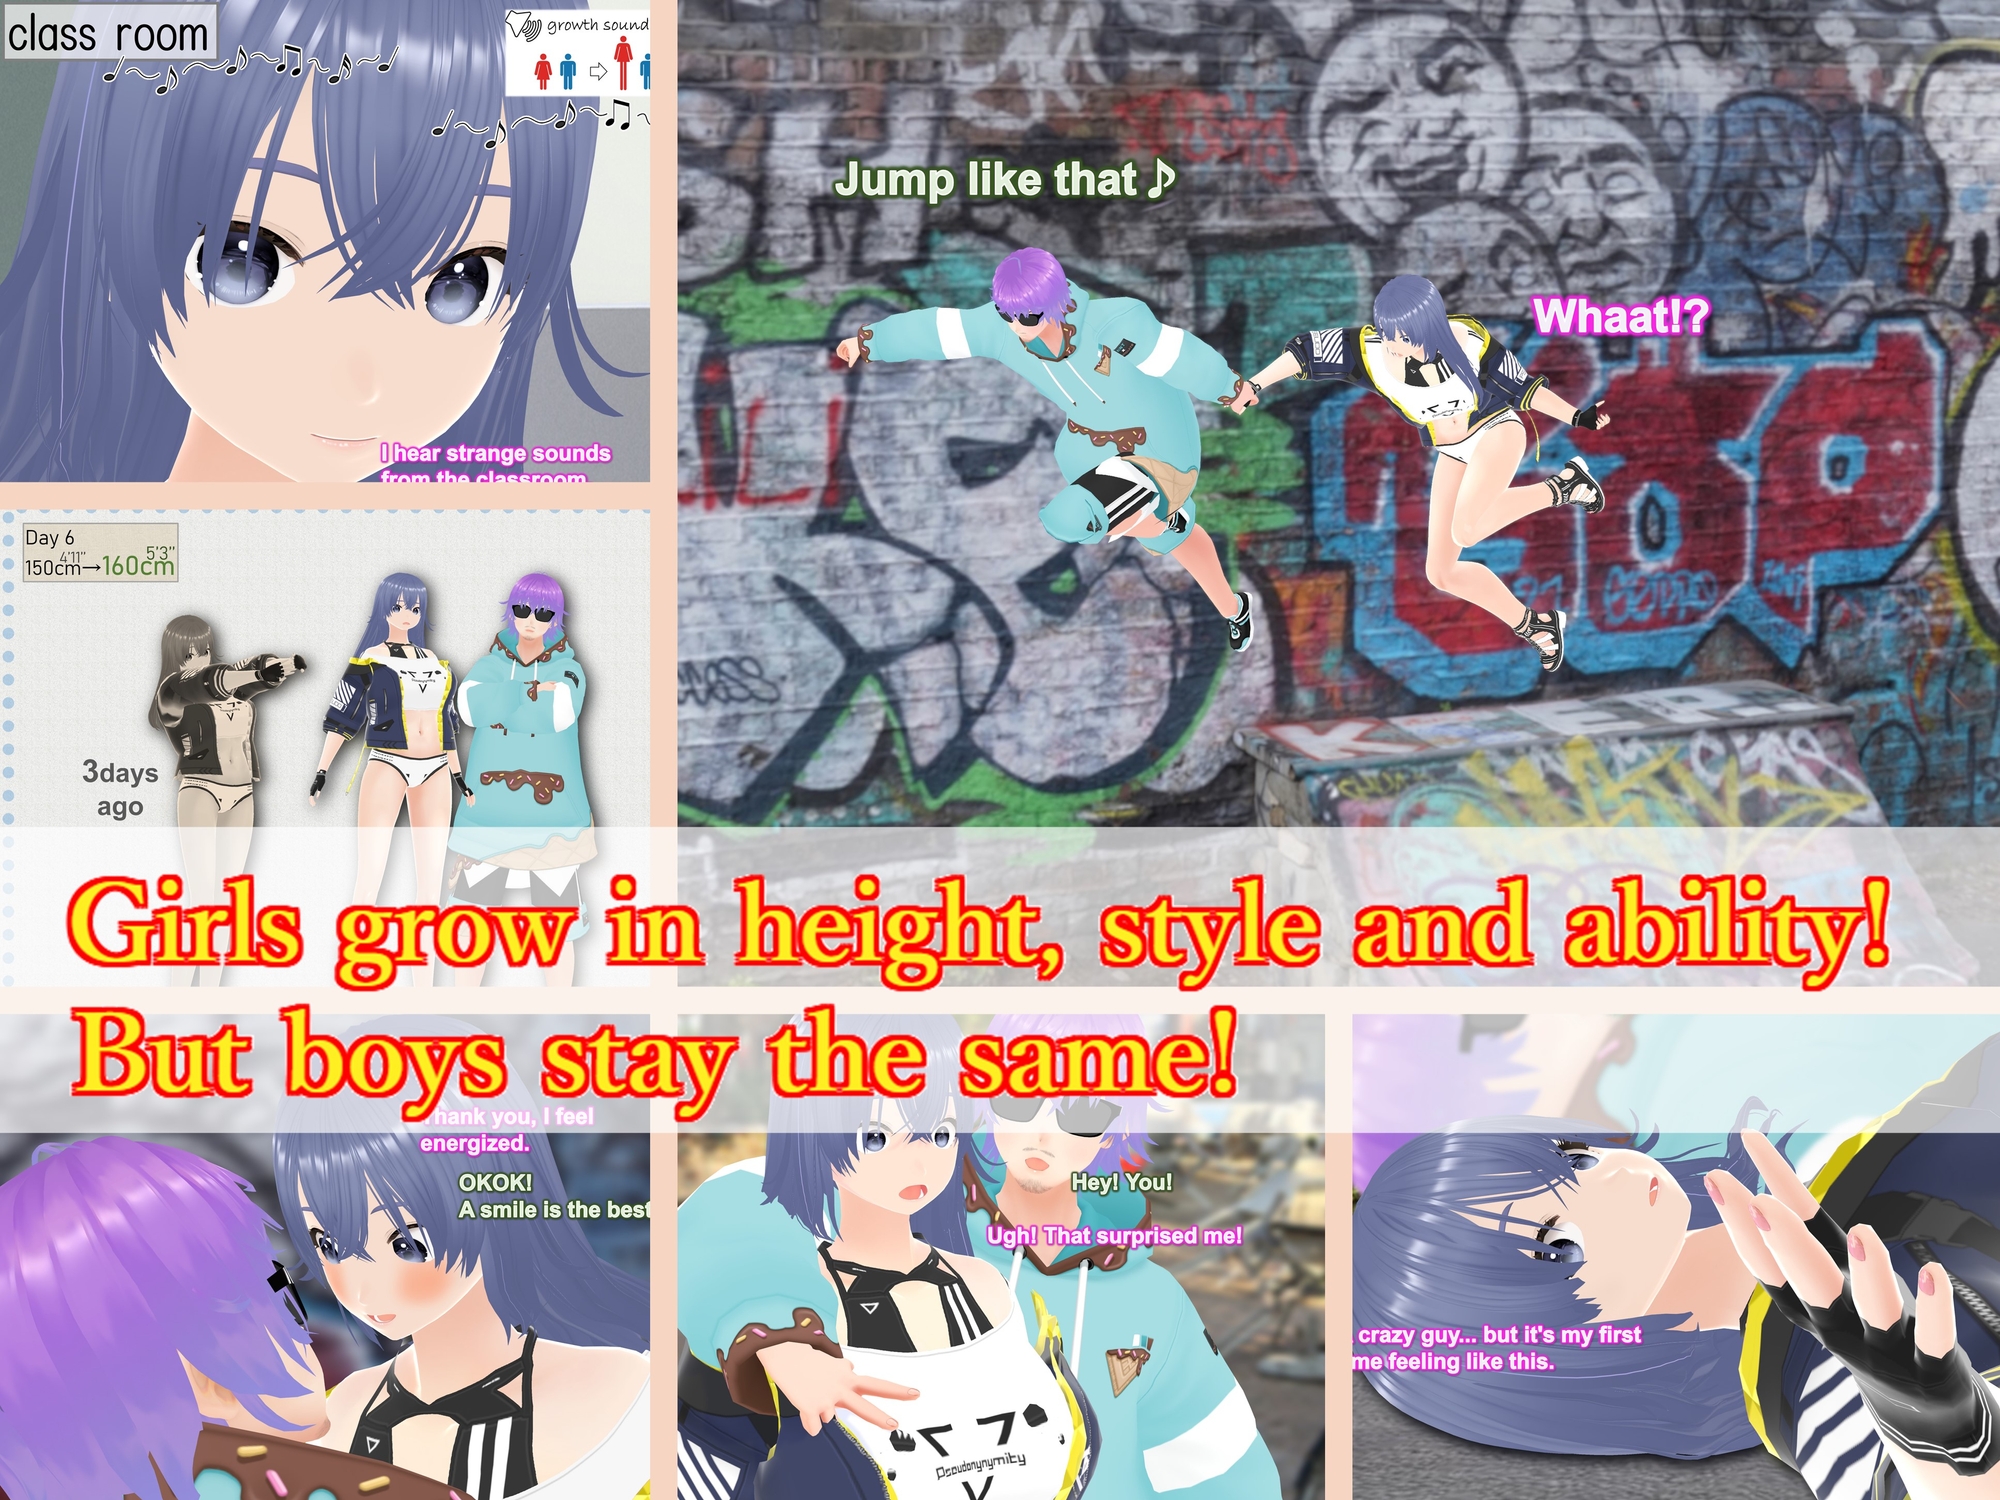 Outgrowing only girls, Overtake boys, Growth sound. street culture Arc